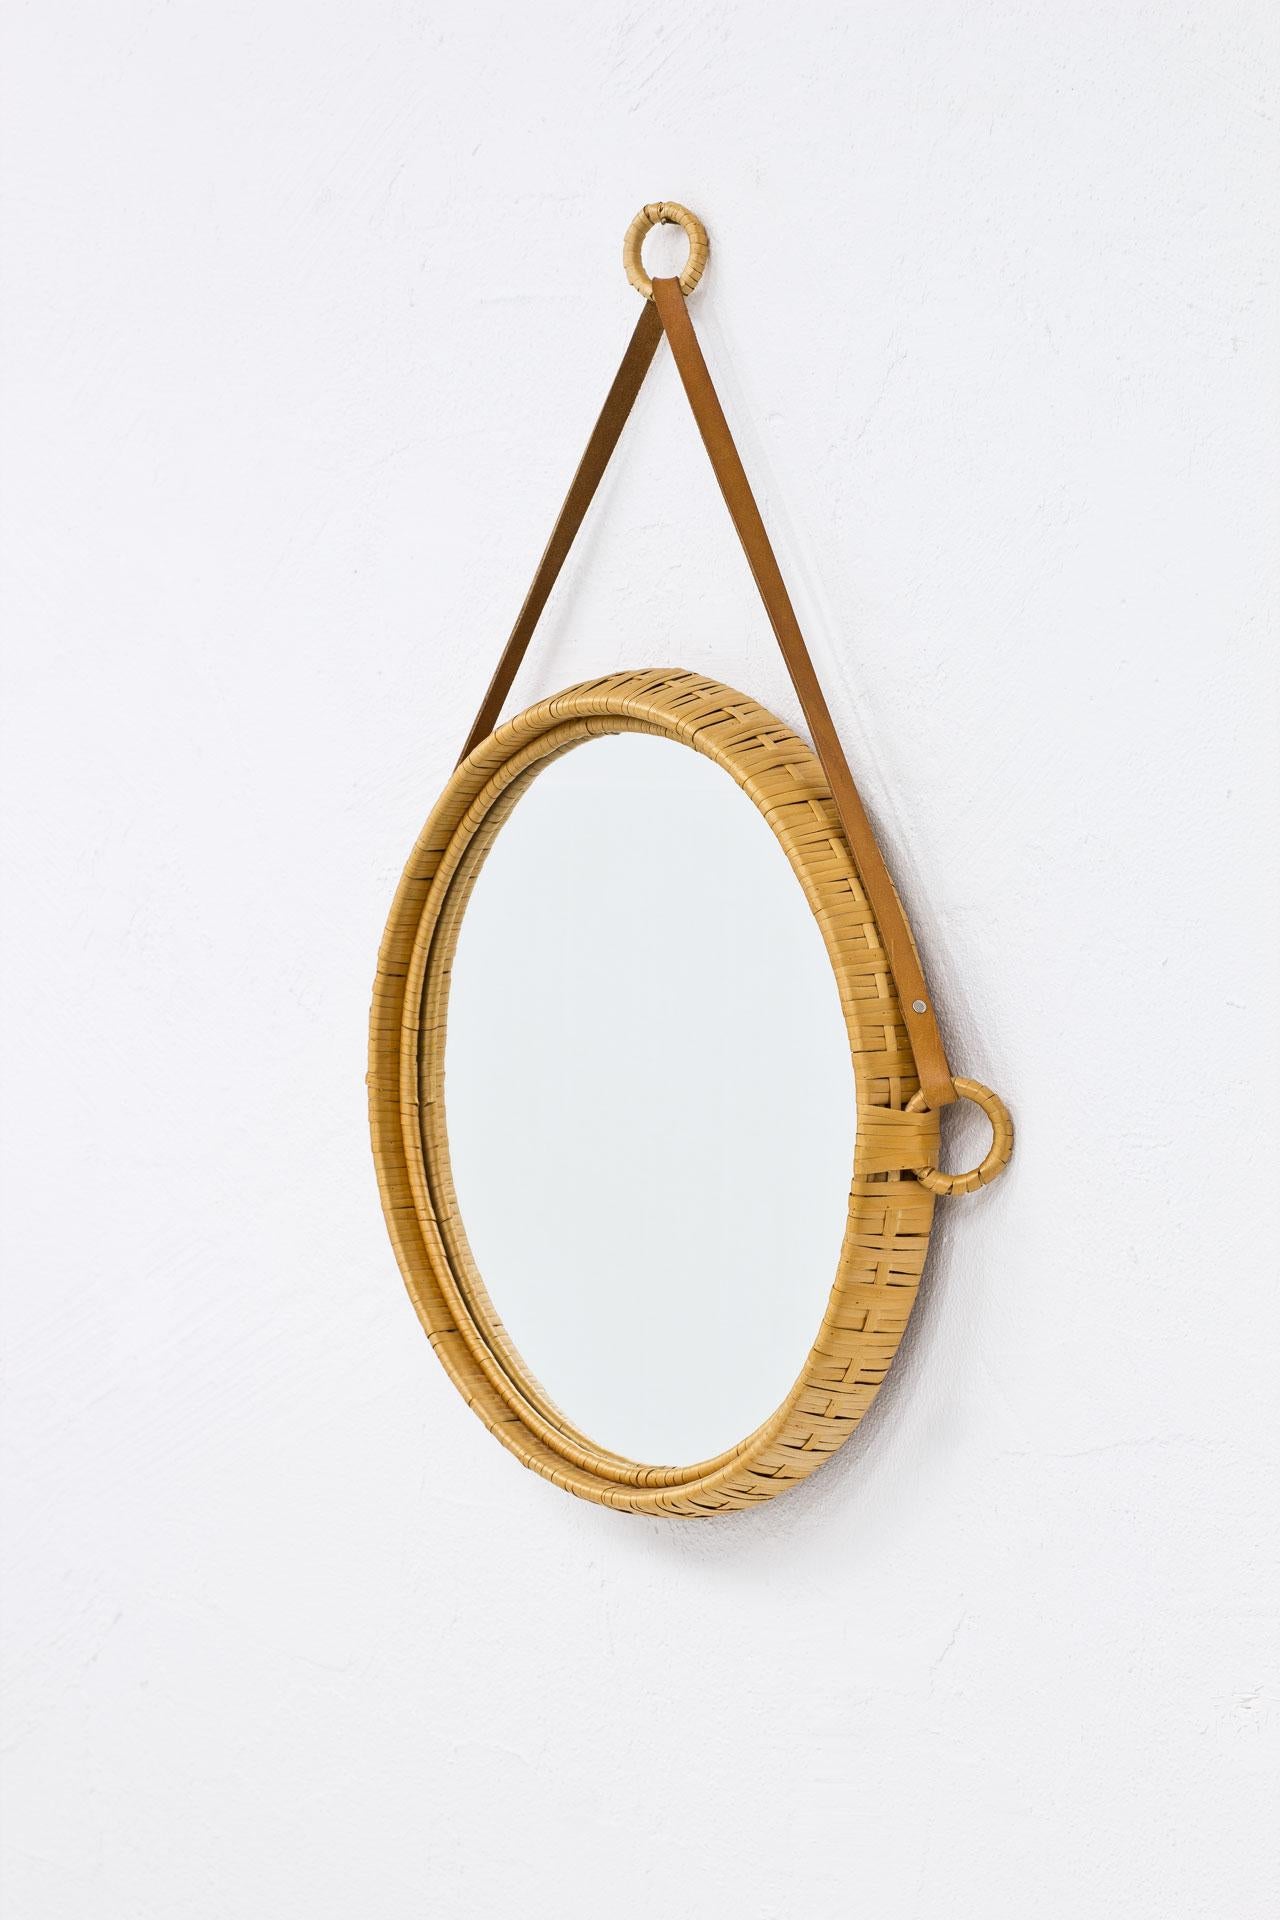 Round wall mirror, made from rattan with leather strap. Manufactured in Sweden during the 1960s by unknown maker.